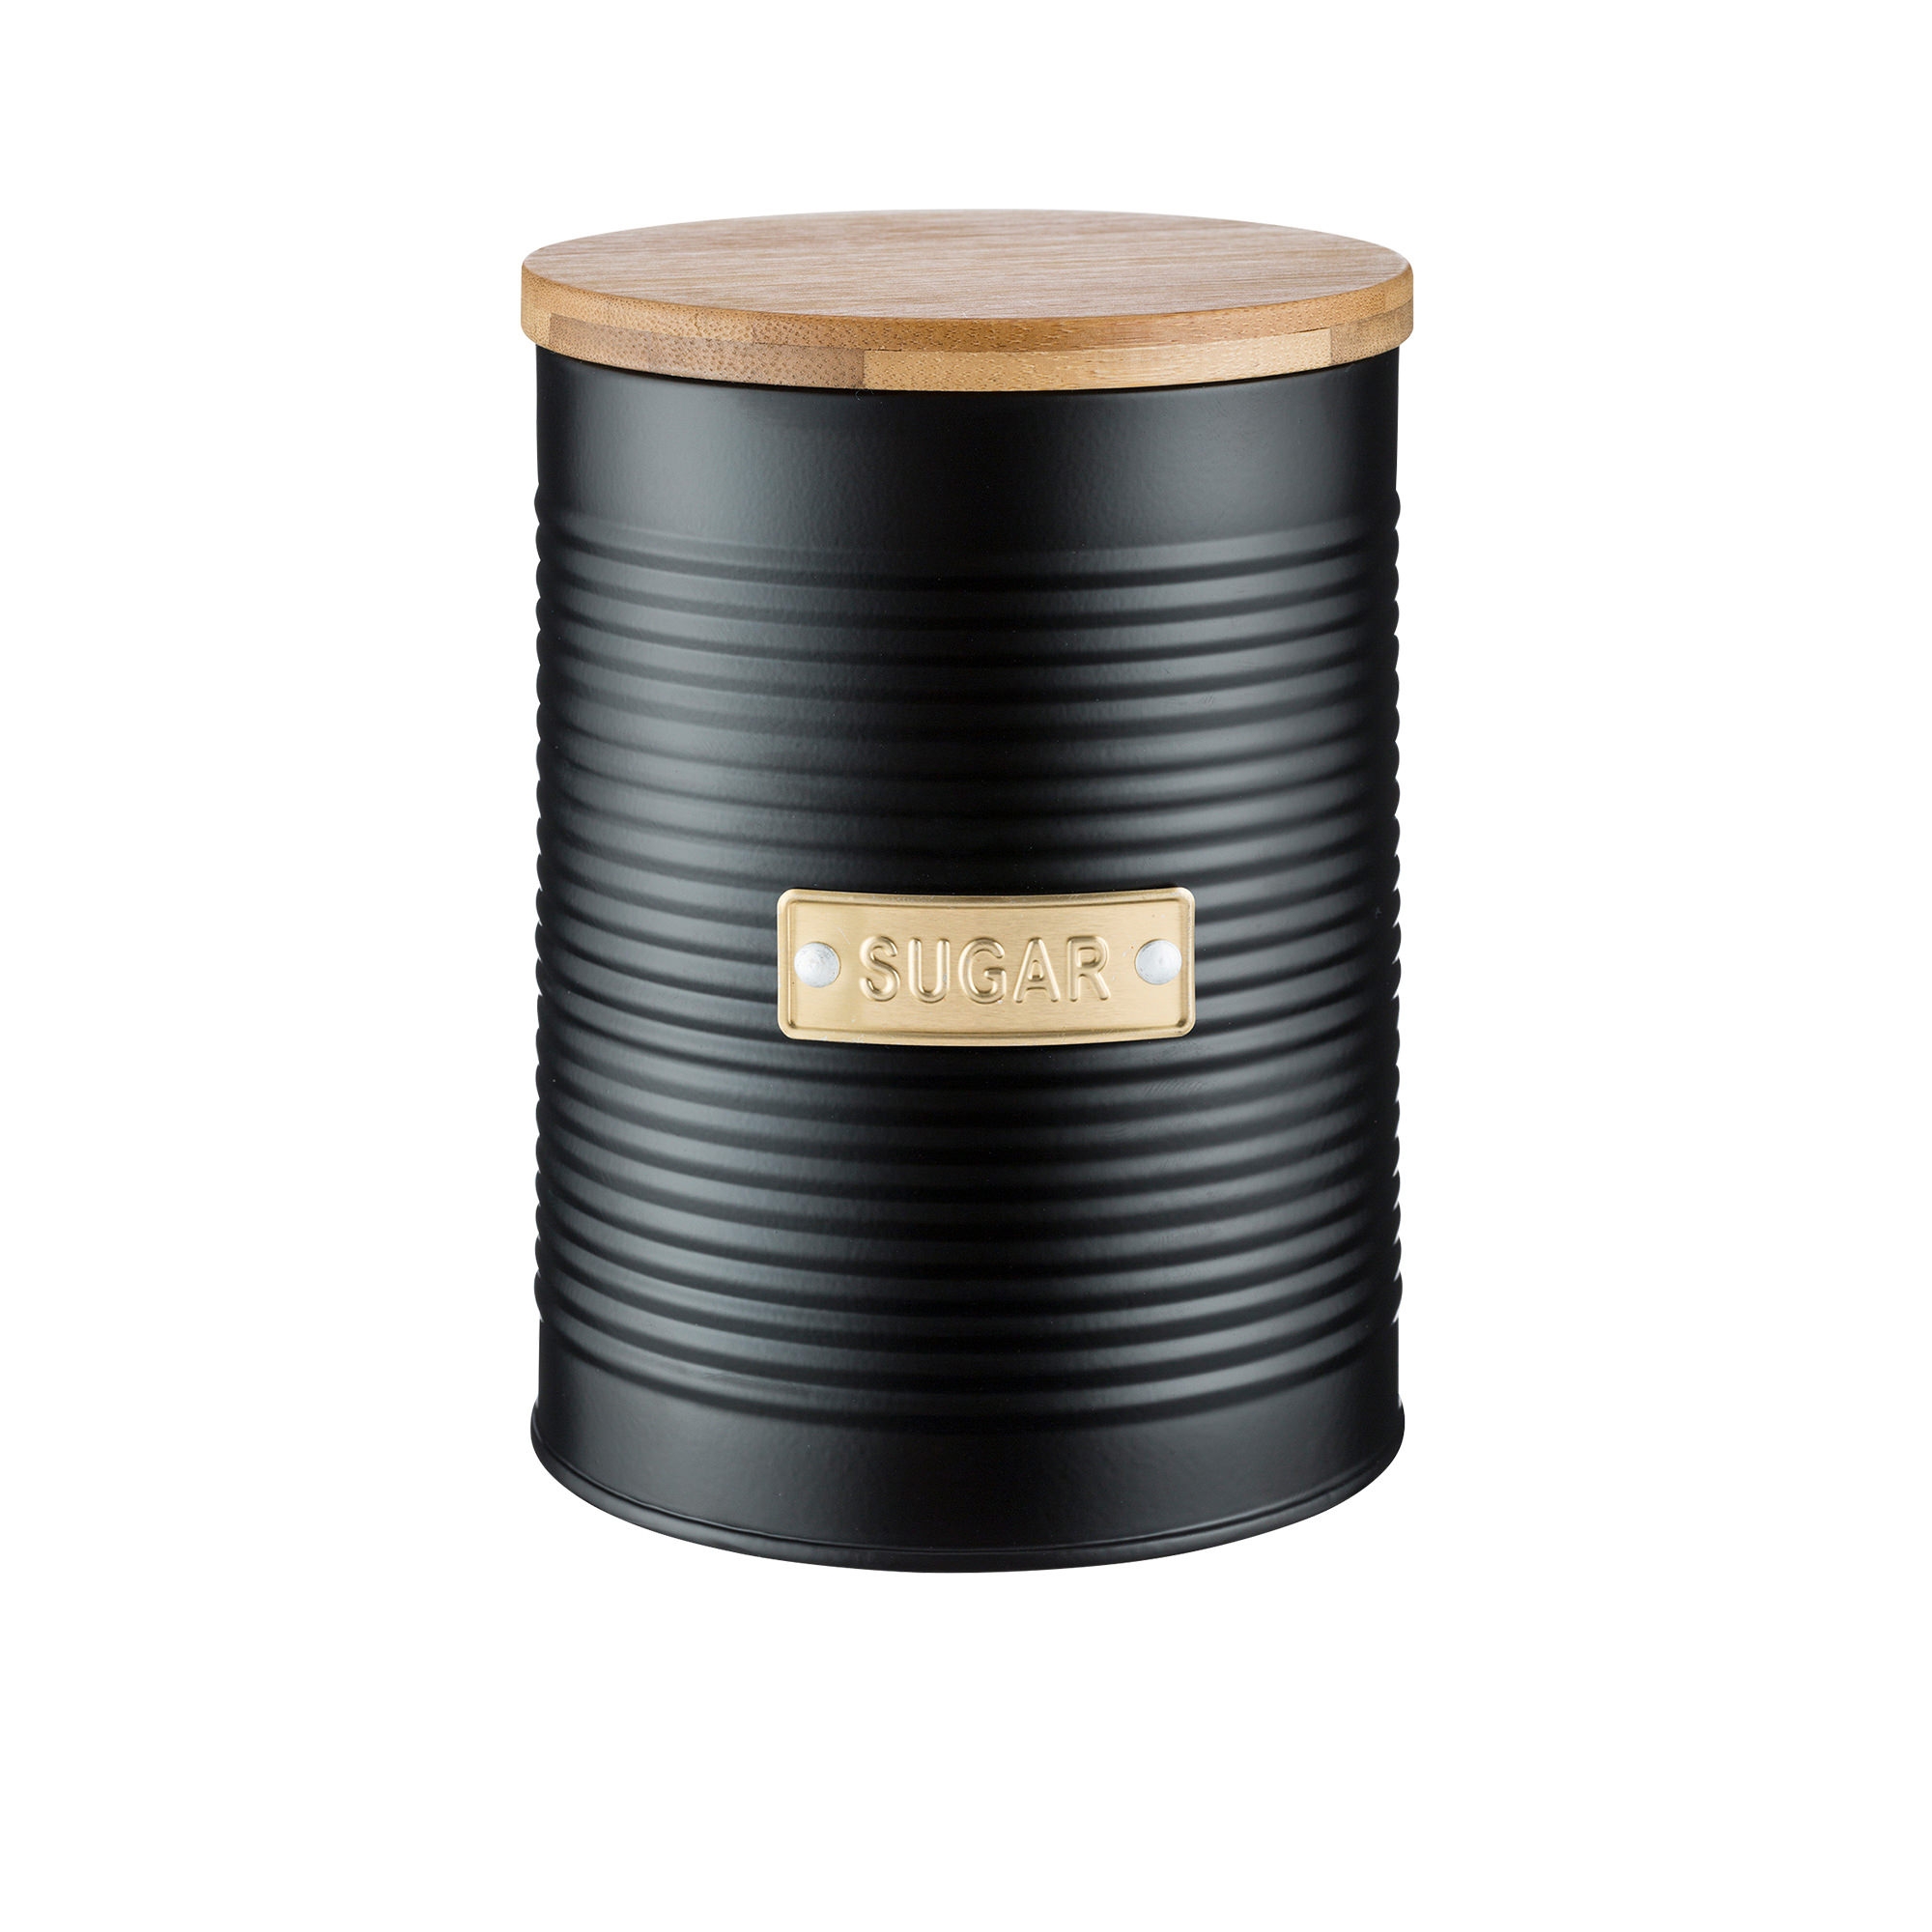 Typhoon Otto Sugar Canister 1.4L Black Image 1